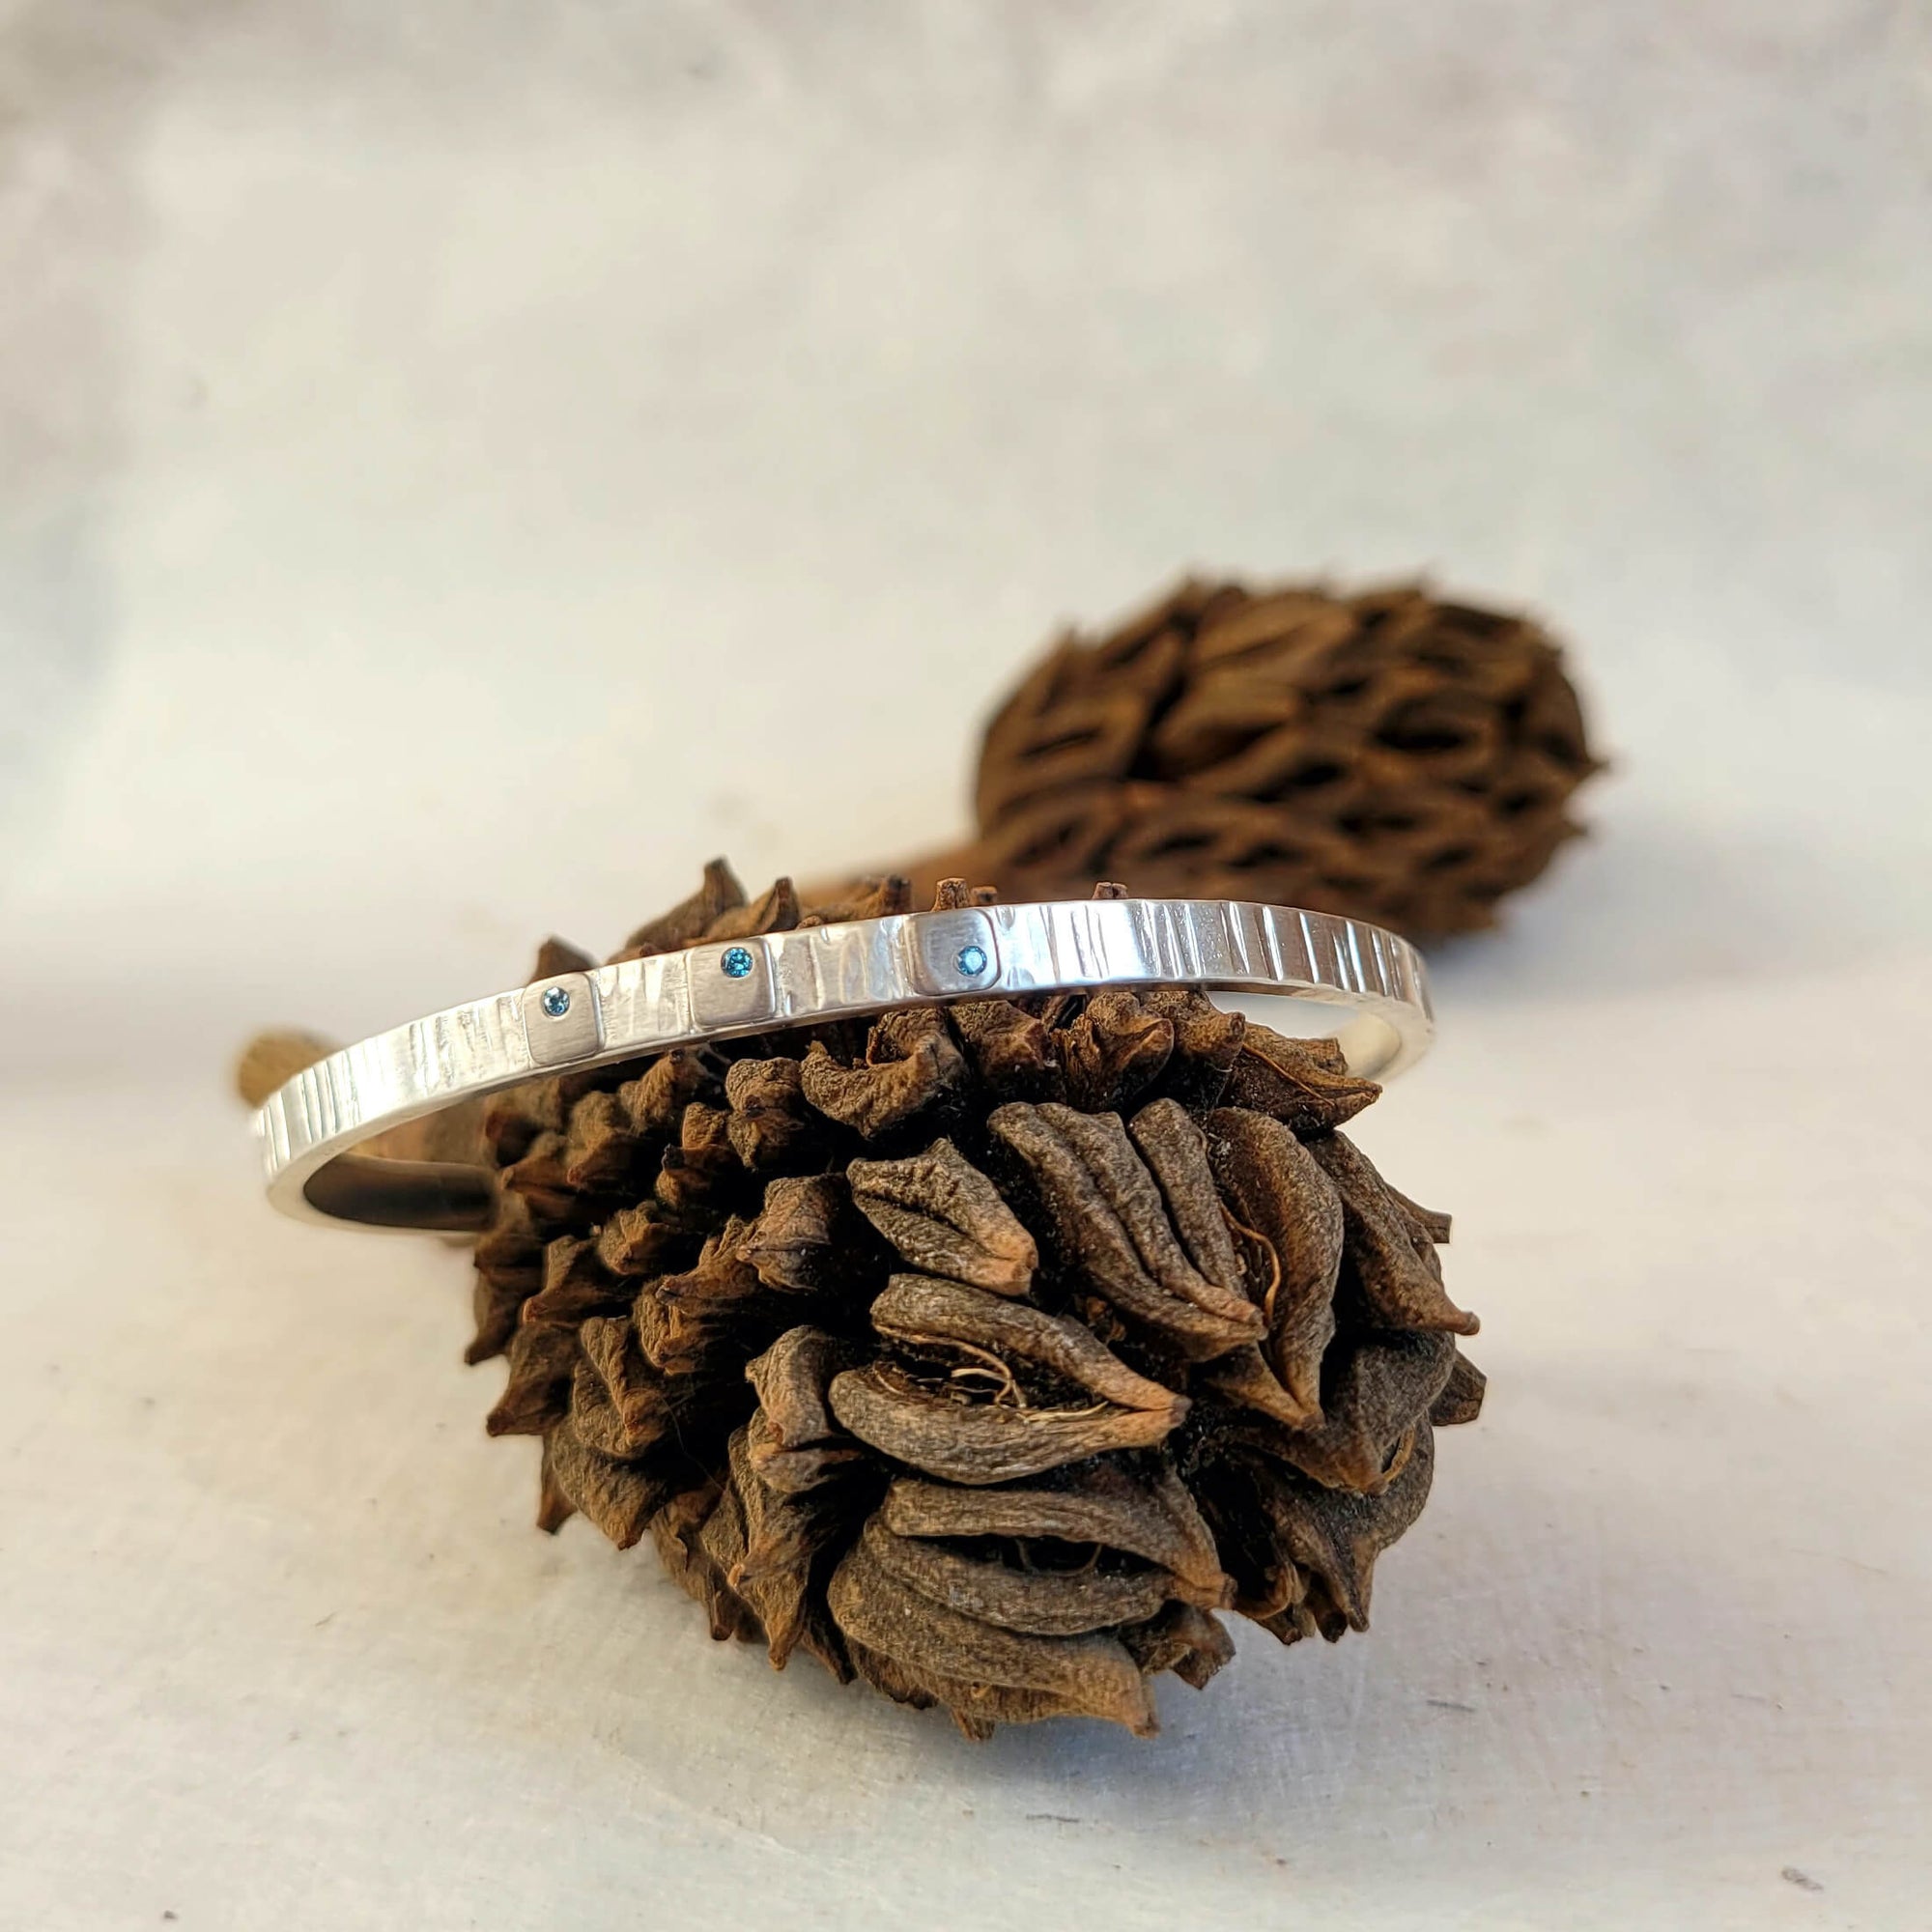 Handmade cuff bracelet with blue diamond accents. Made with recycled sterling silver and palladium.